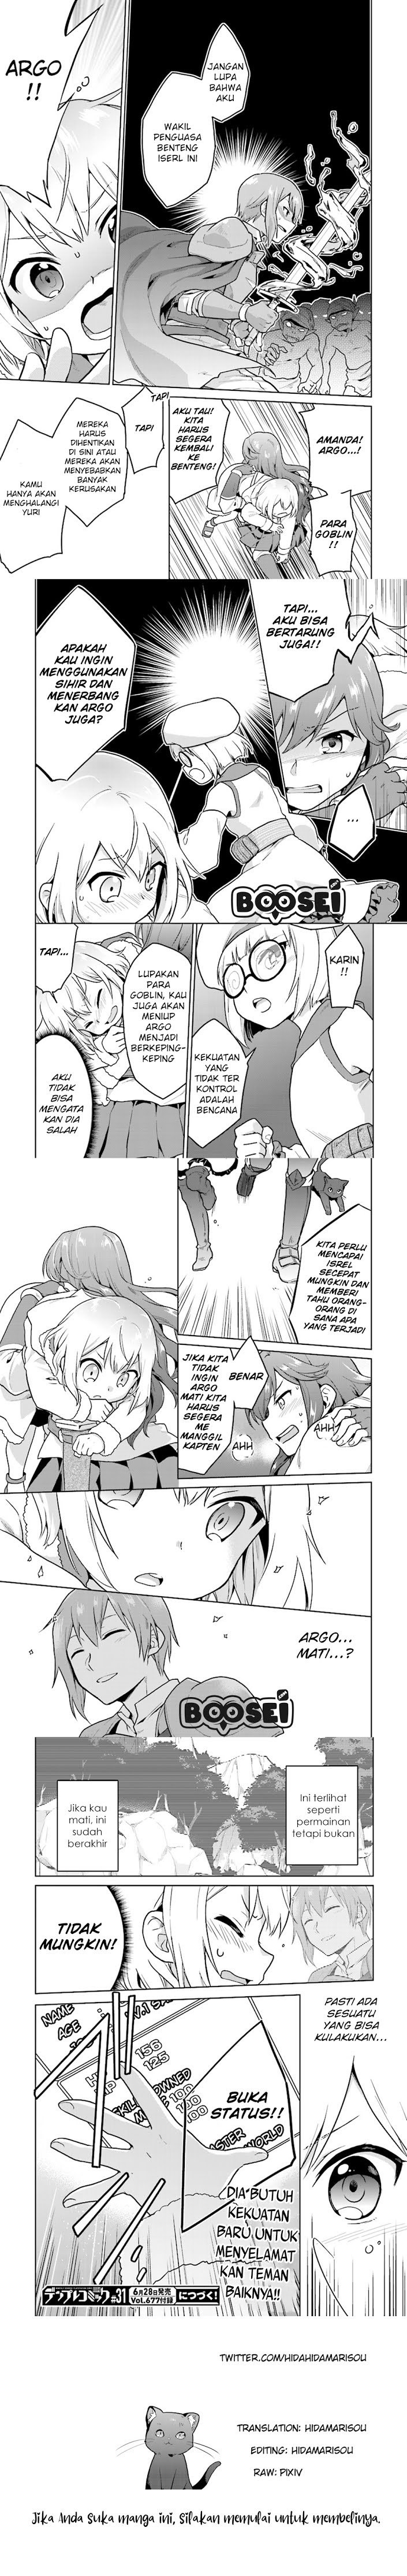 The Small Sage Will Try Her Best In the Different World from Lv. 1! Chapter 05